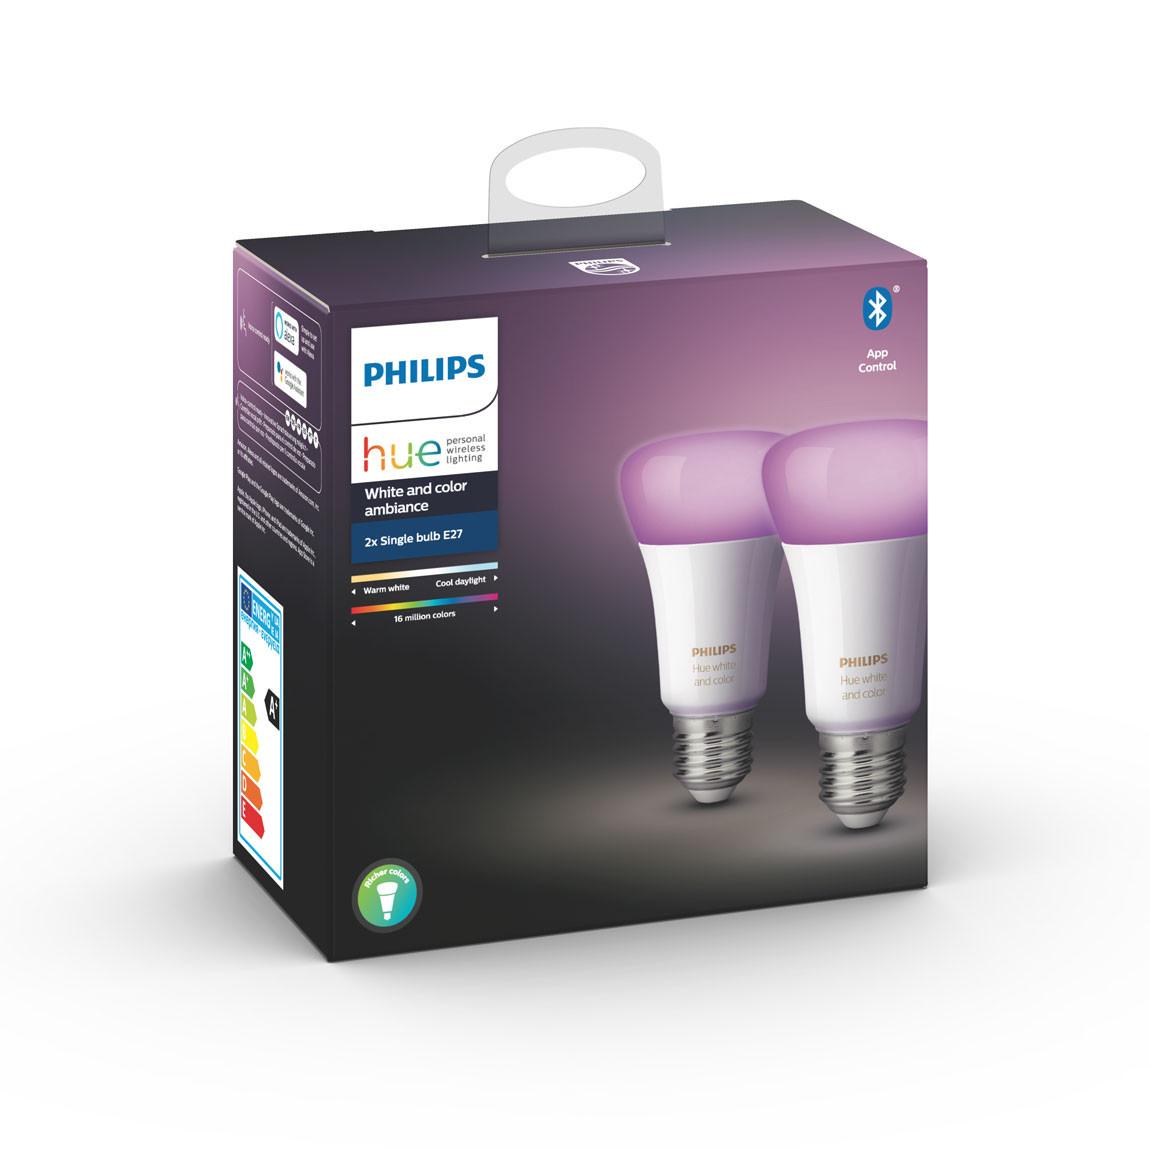 Philips Hue White and Color Ambiance E27 Bluetooth 2er-Set Verpackung schräge Ansicht 